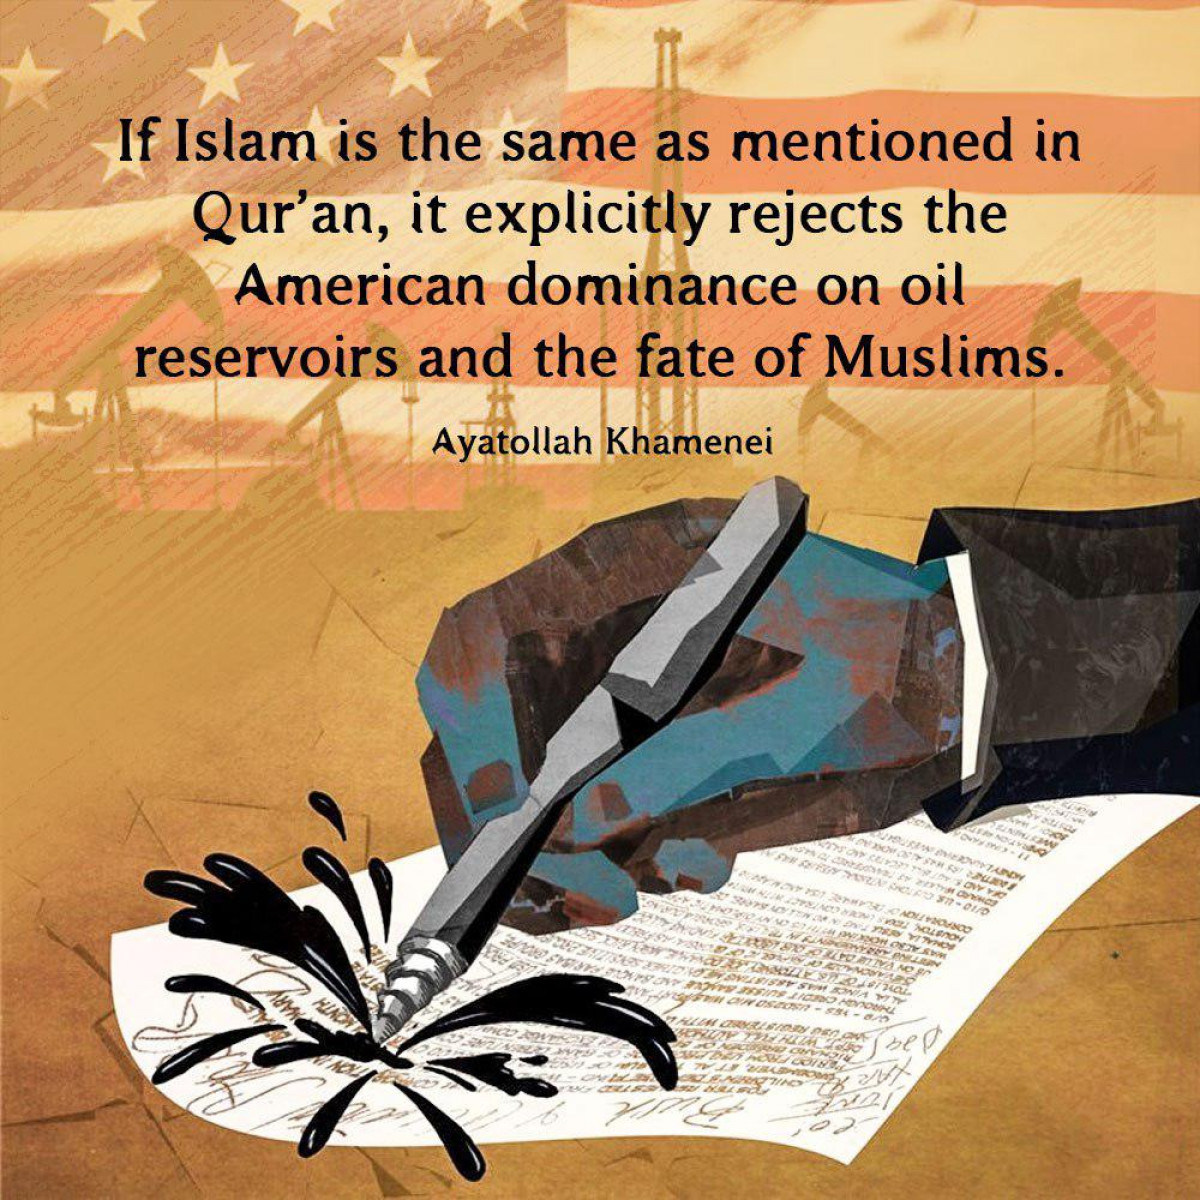 If Islam is the same as mentioned in Qur'an